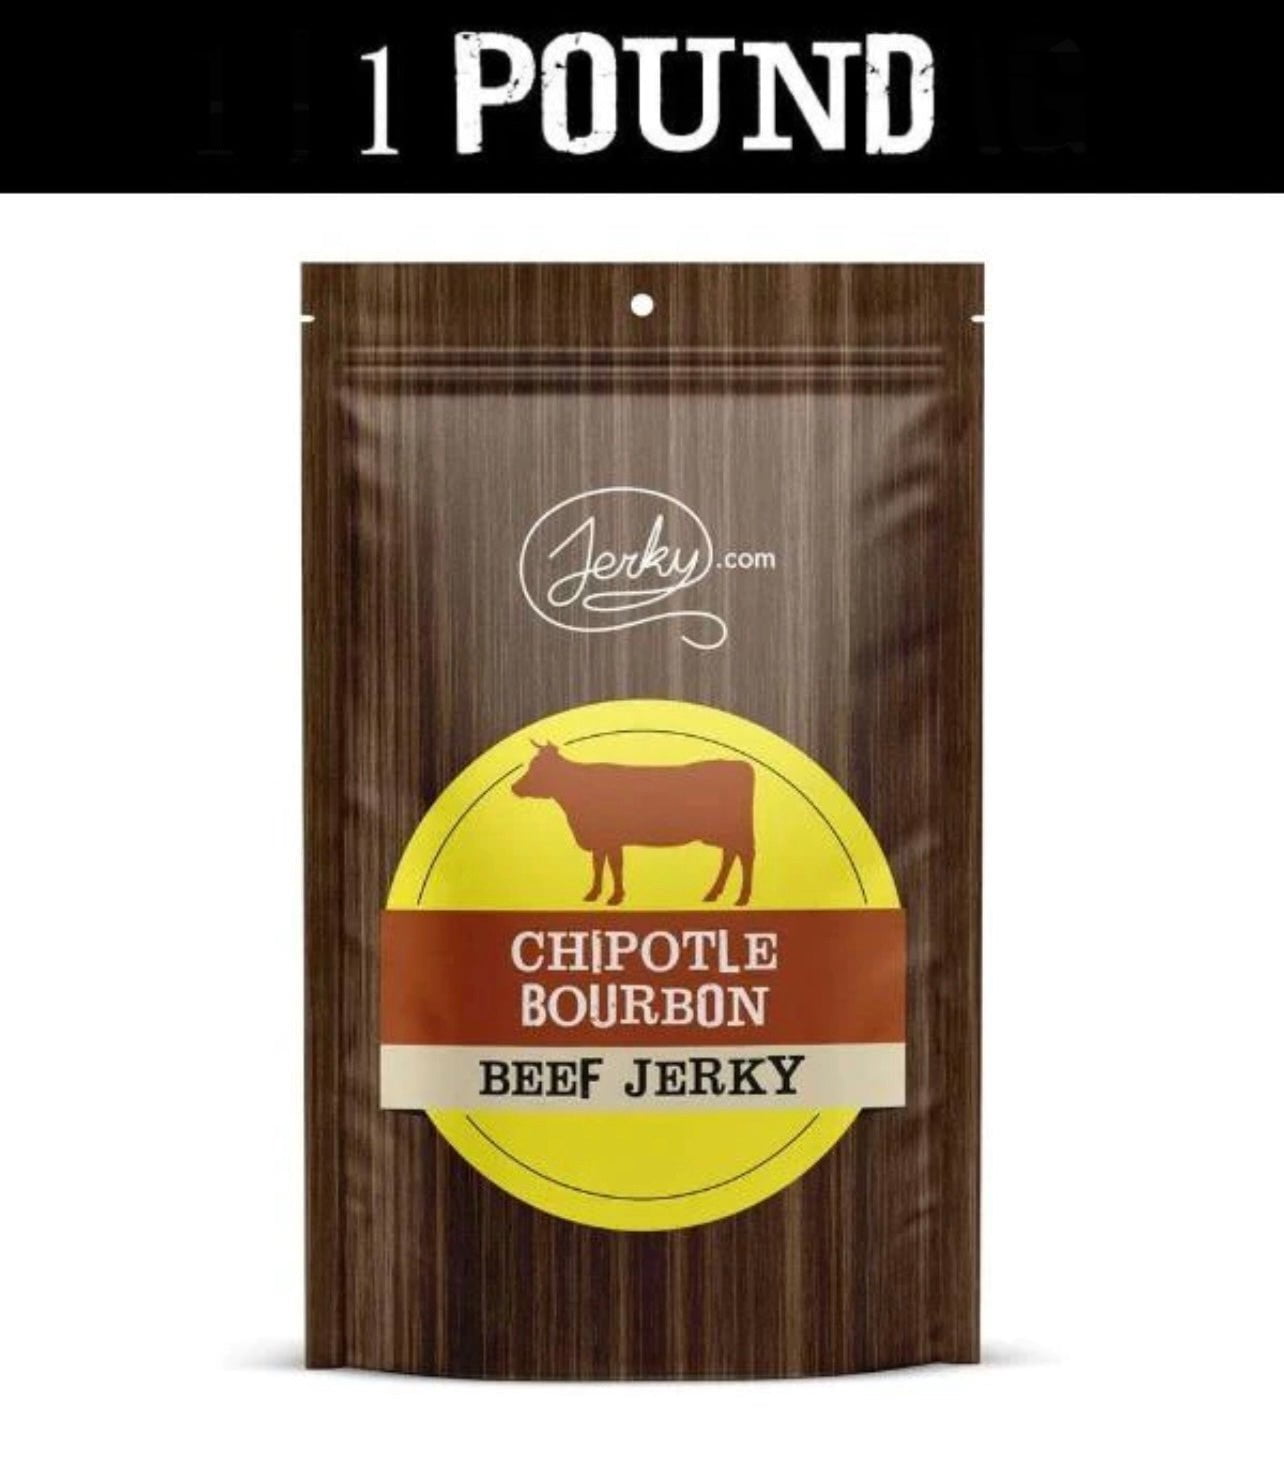 All-Natural Beef Jerky - Chipotle Bourbon - 1 Pound by Jerky.com